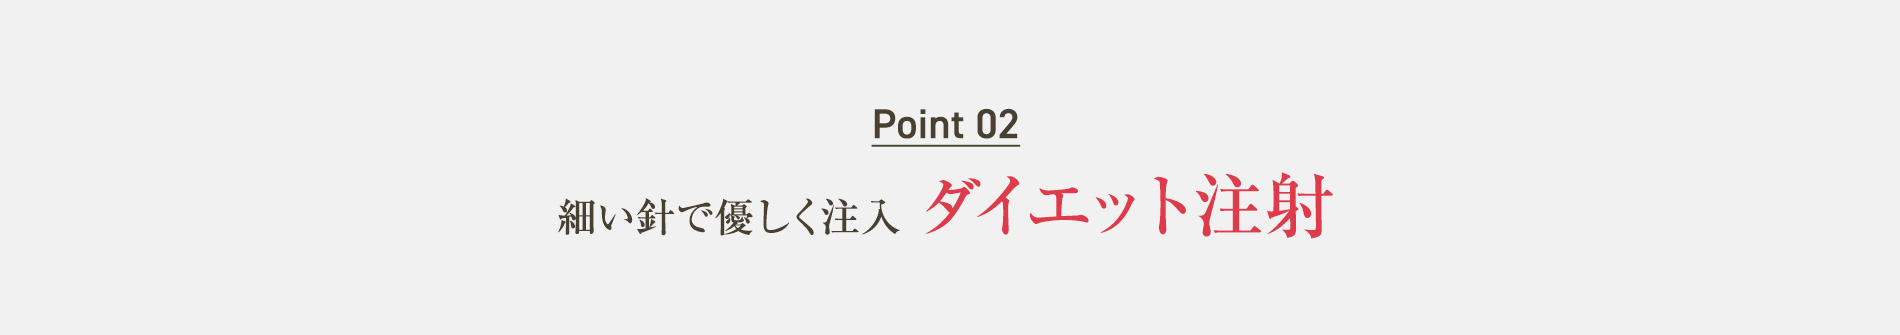 Point 02　細い針で優しく注入ダイエット注